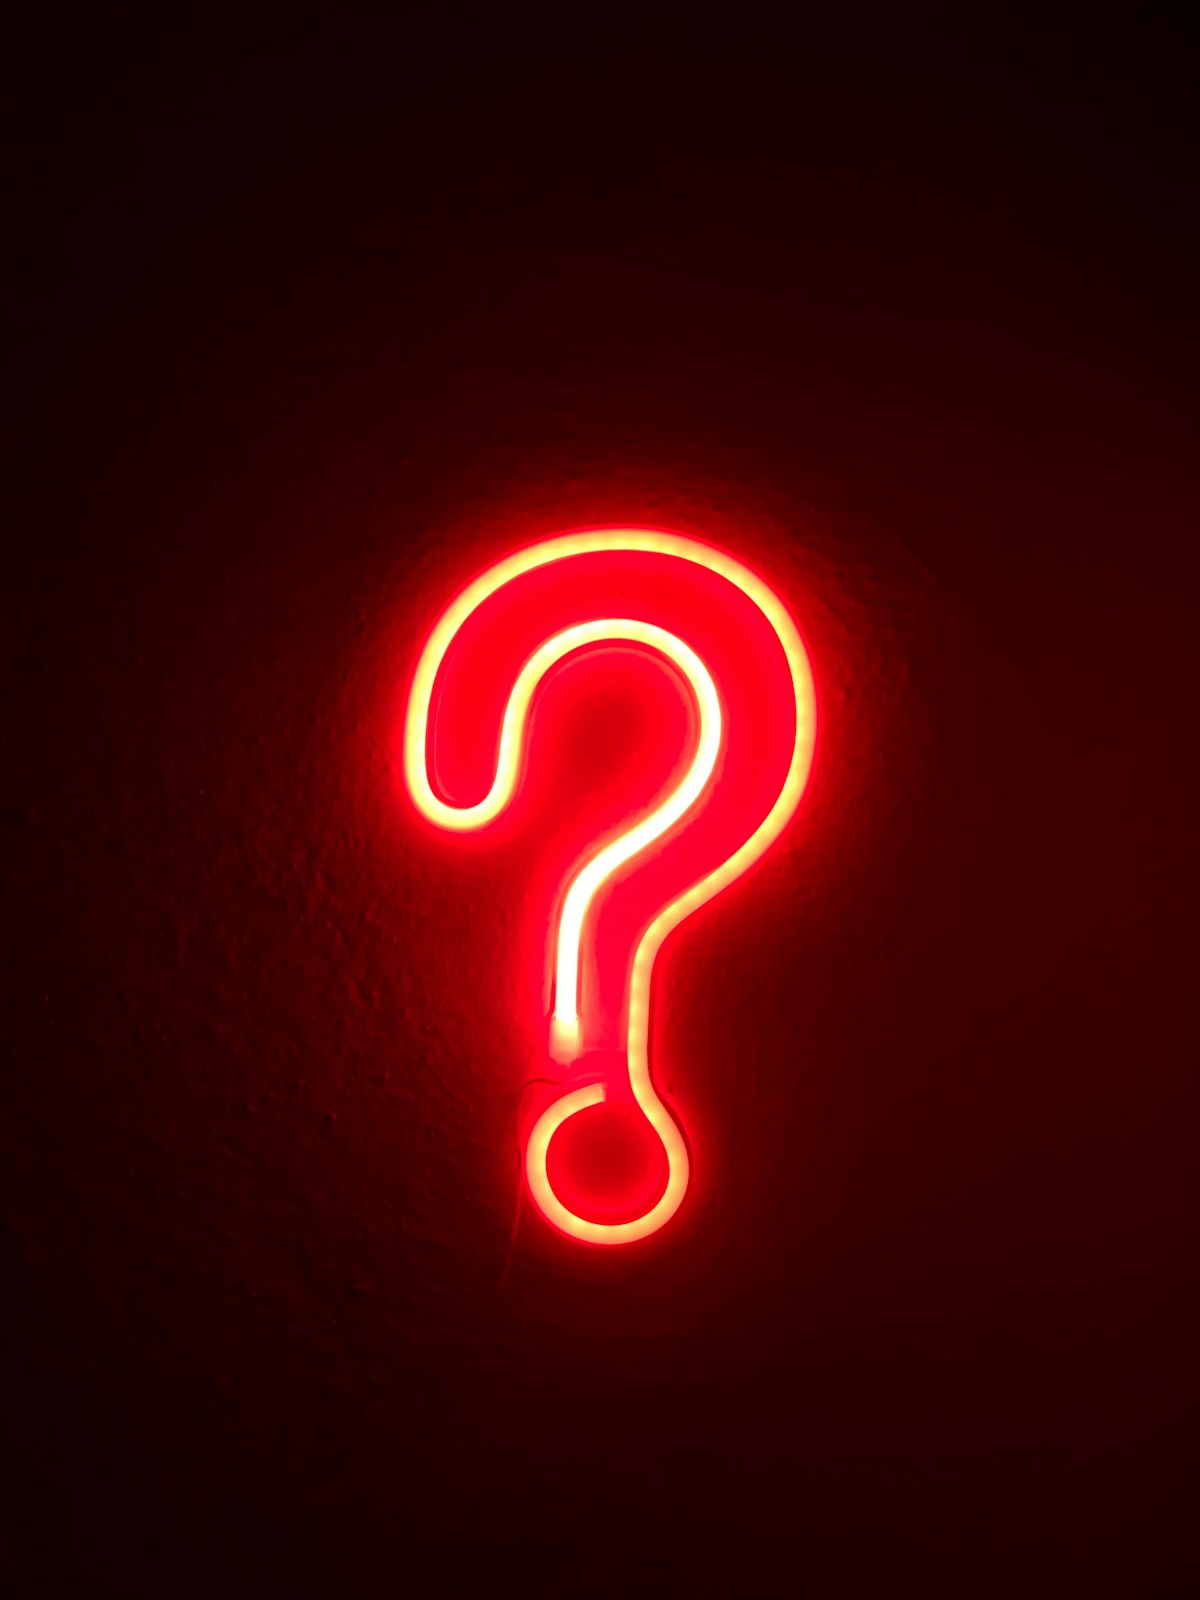 A red neon outlined question mark against a black wall.  The neon There is a red glow against the white and yellow outline of the question mark.